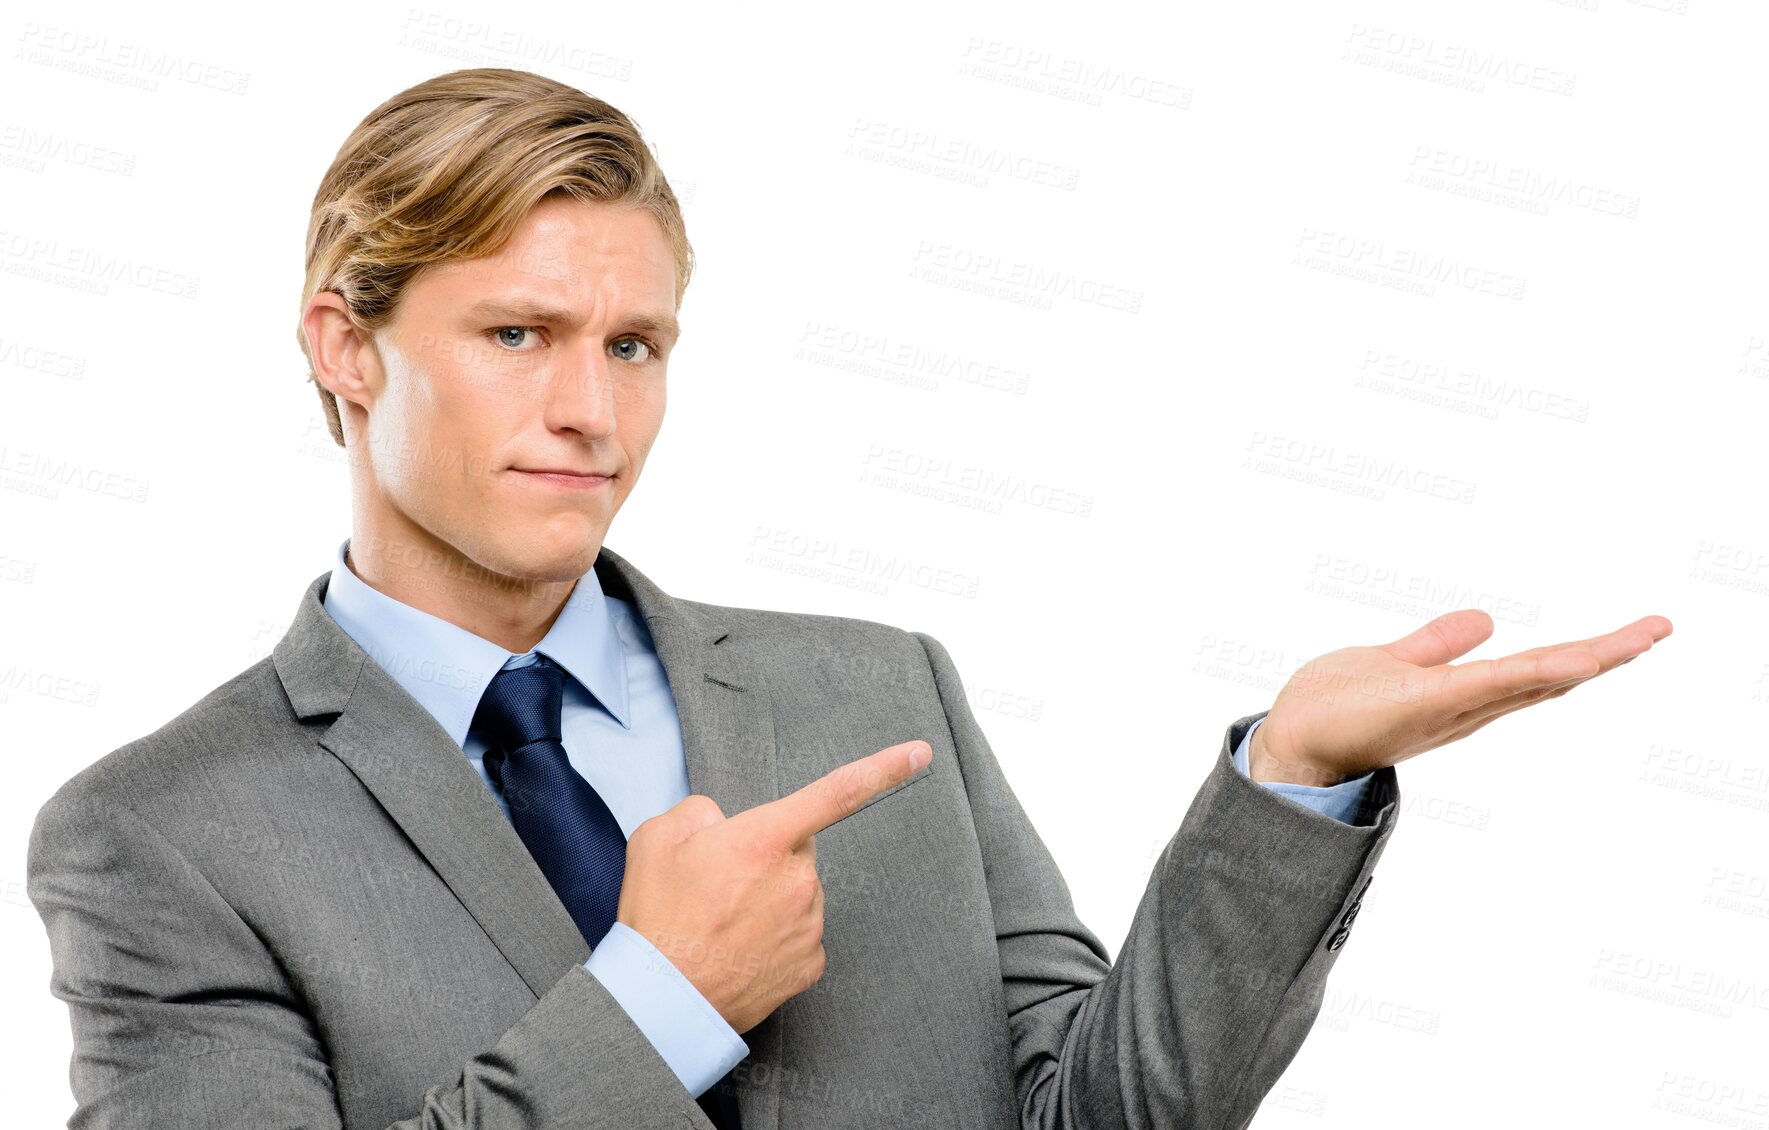 Buy stock photo Portrait, man and pointing with hands for a decision, option or choice on transparent, isolated or png background. Businessman, confused and thinking face with gesture to information or idea